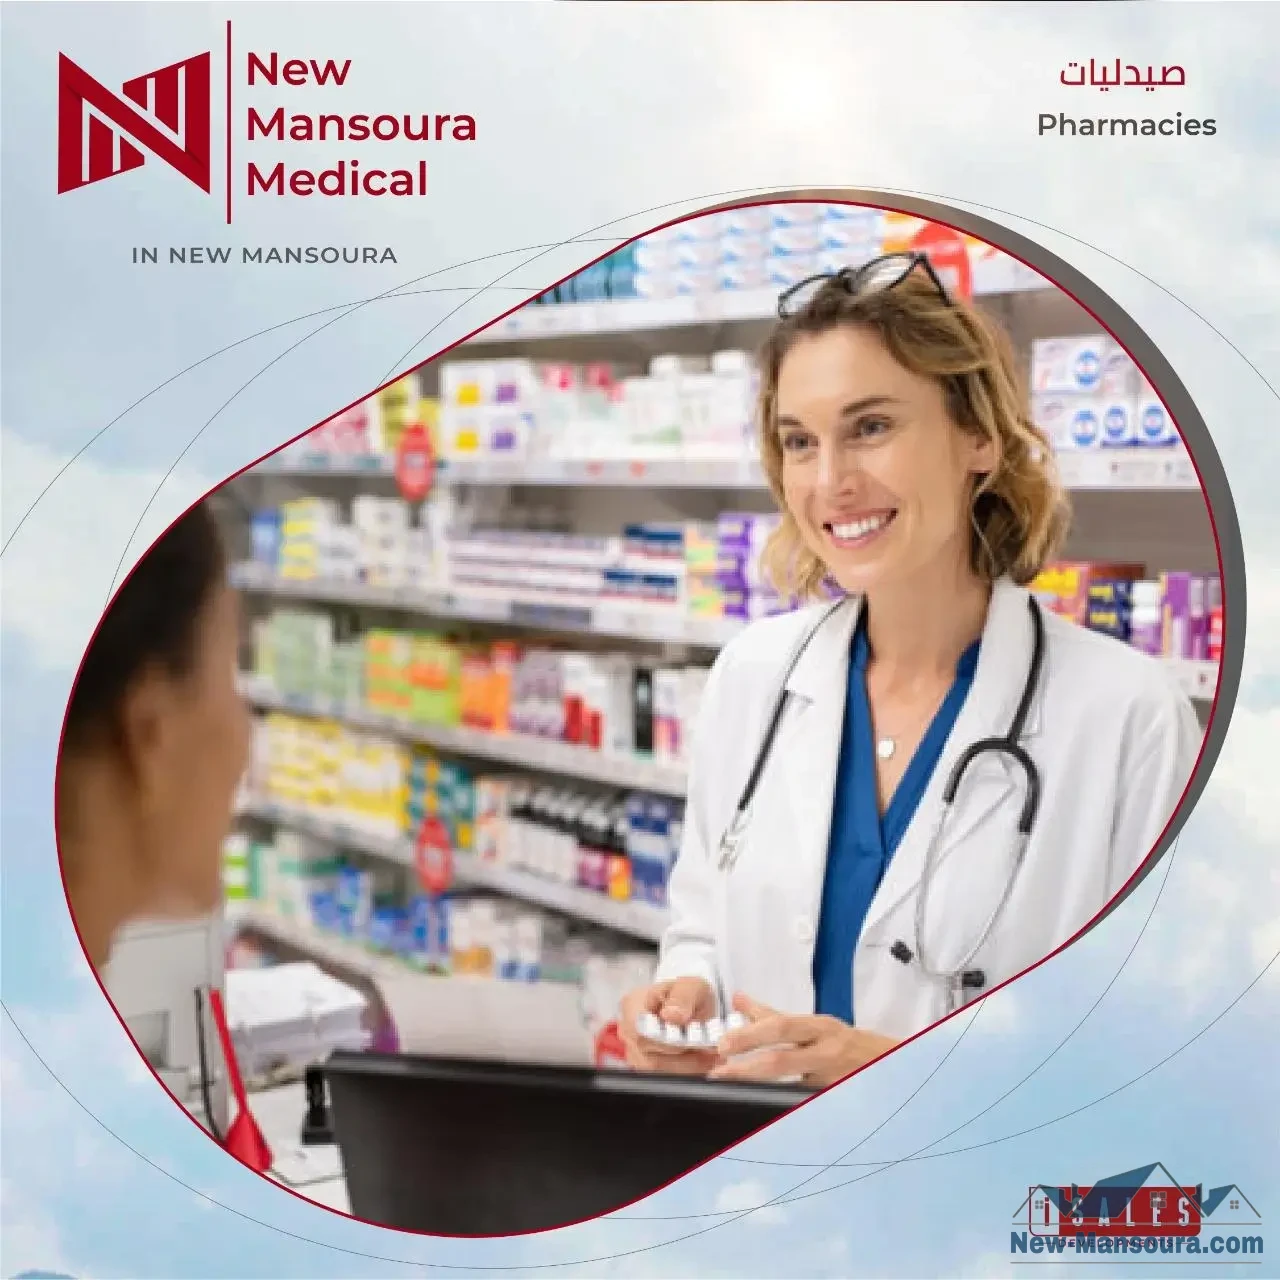 New Mansoura Medical isales company - own your clinic now